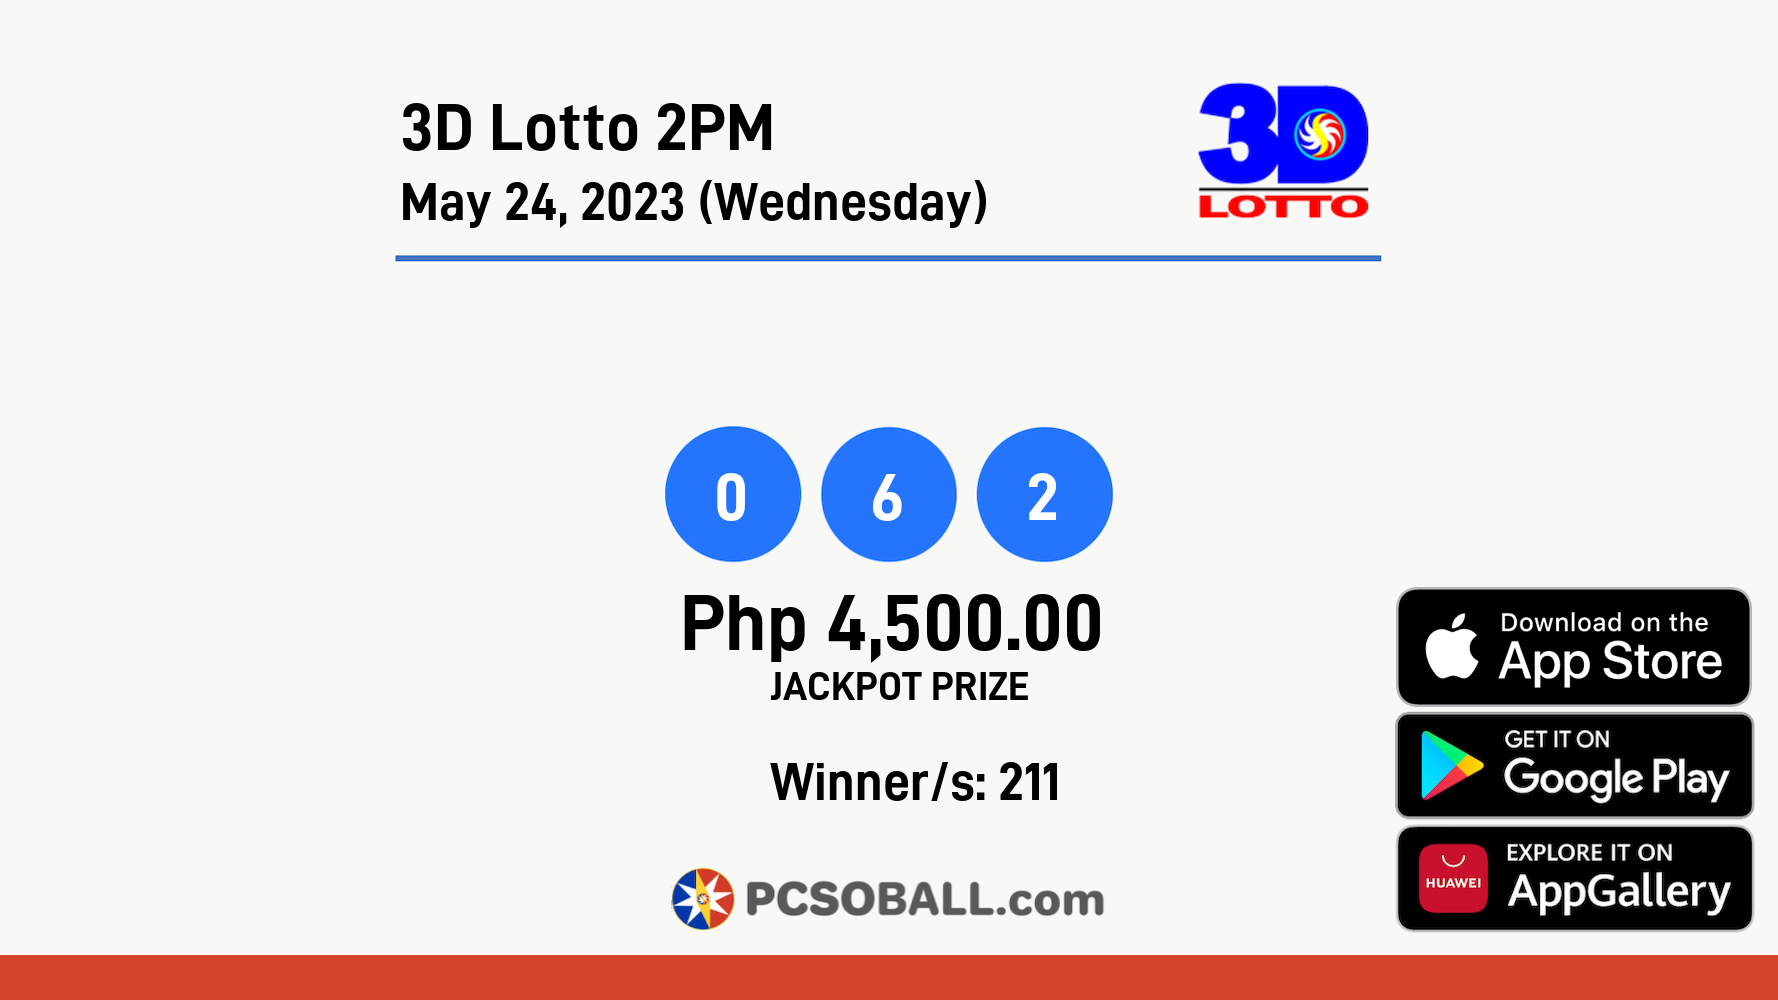 3D Lotto 2PM May 24, 2023 (Wednesday) Result